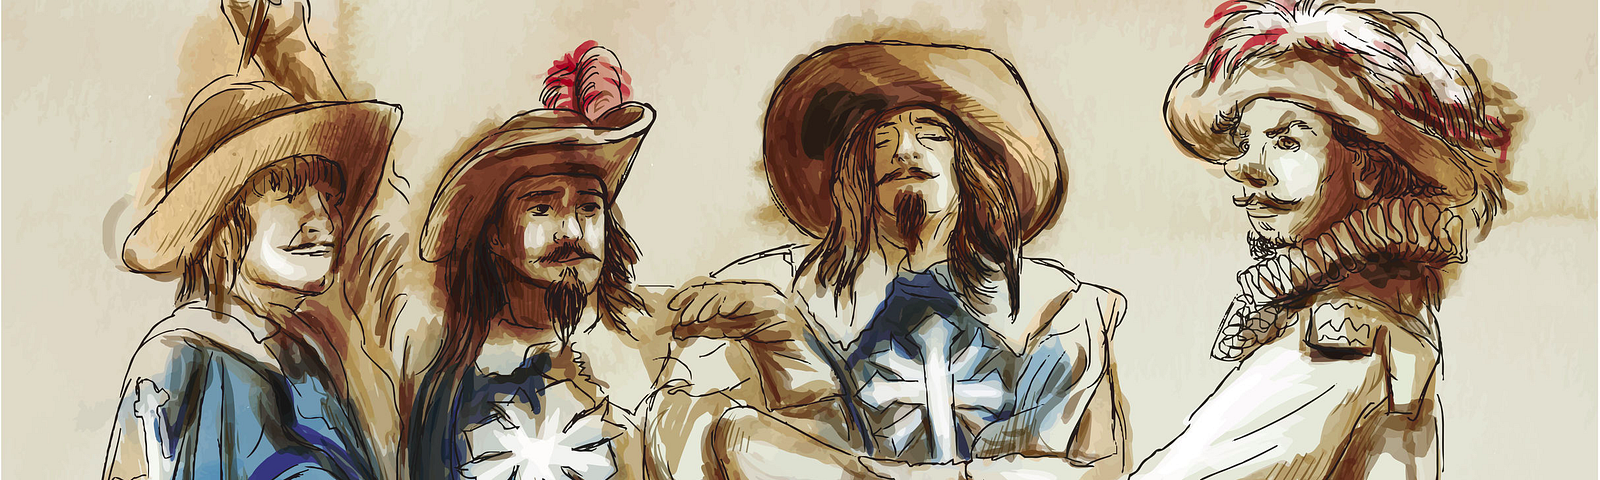 The Three Musketeers. An hand drawn illustration.